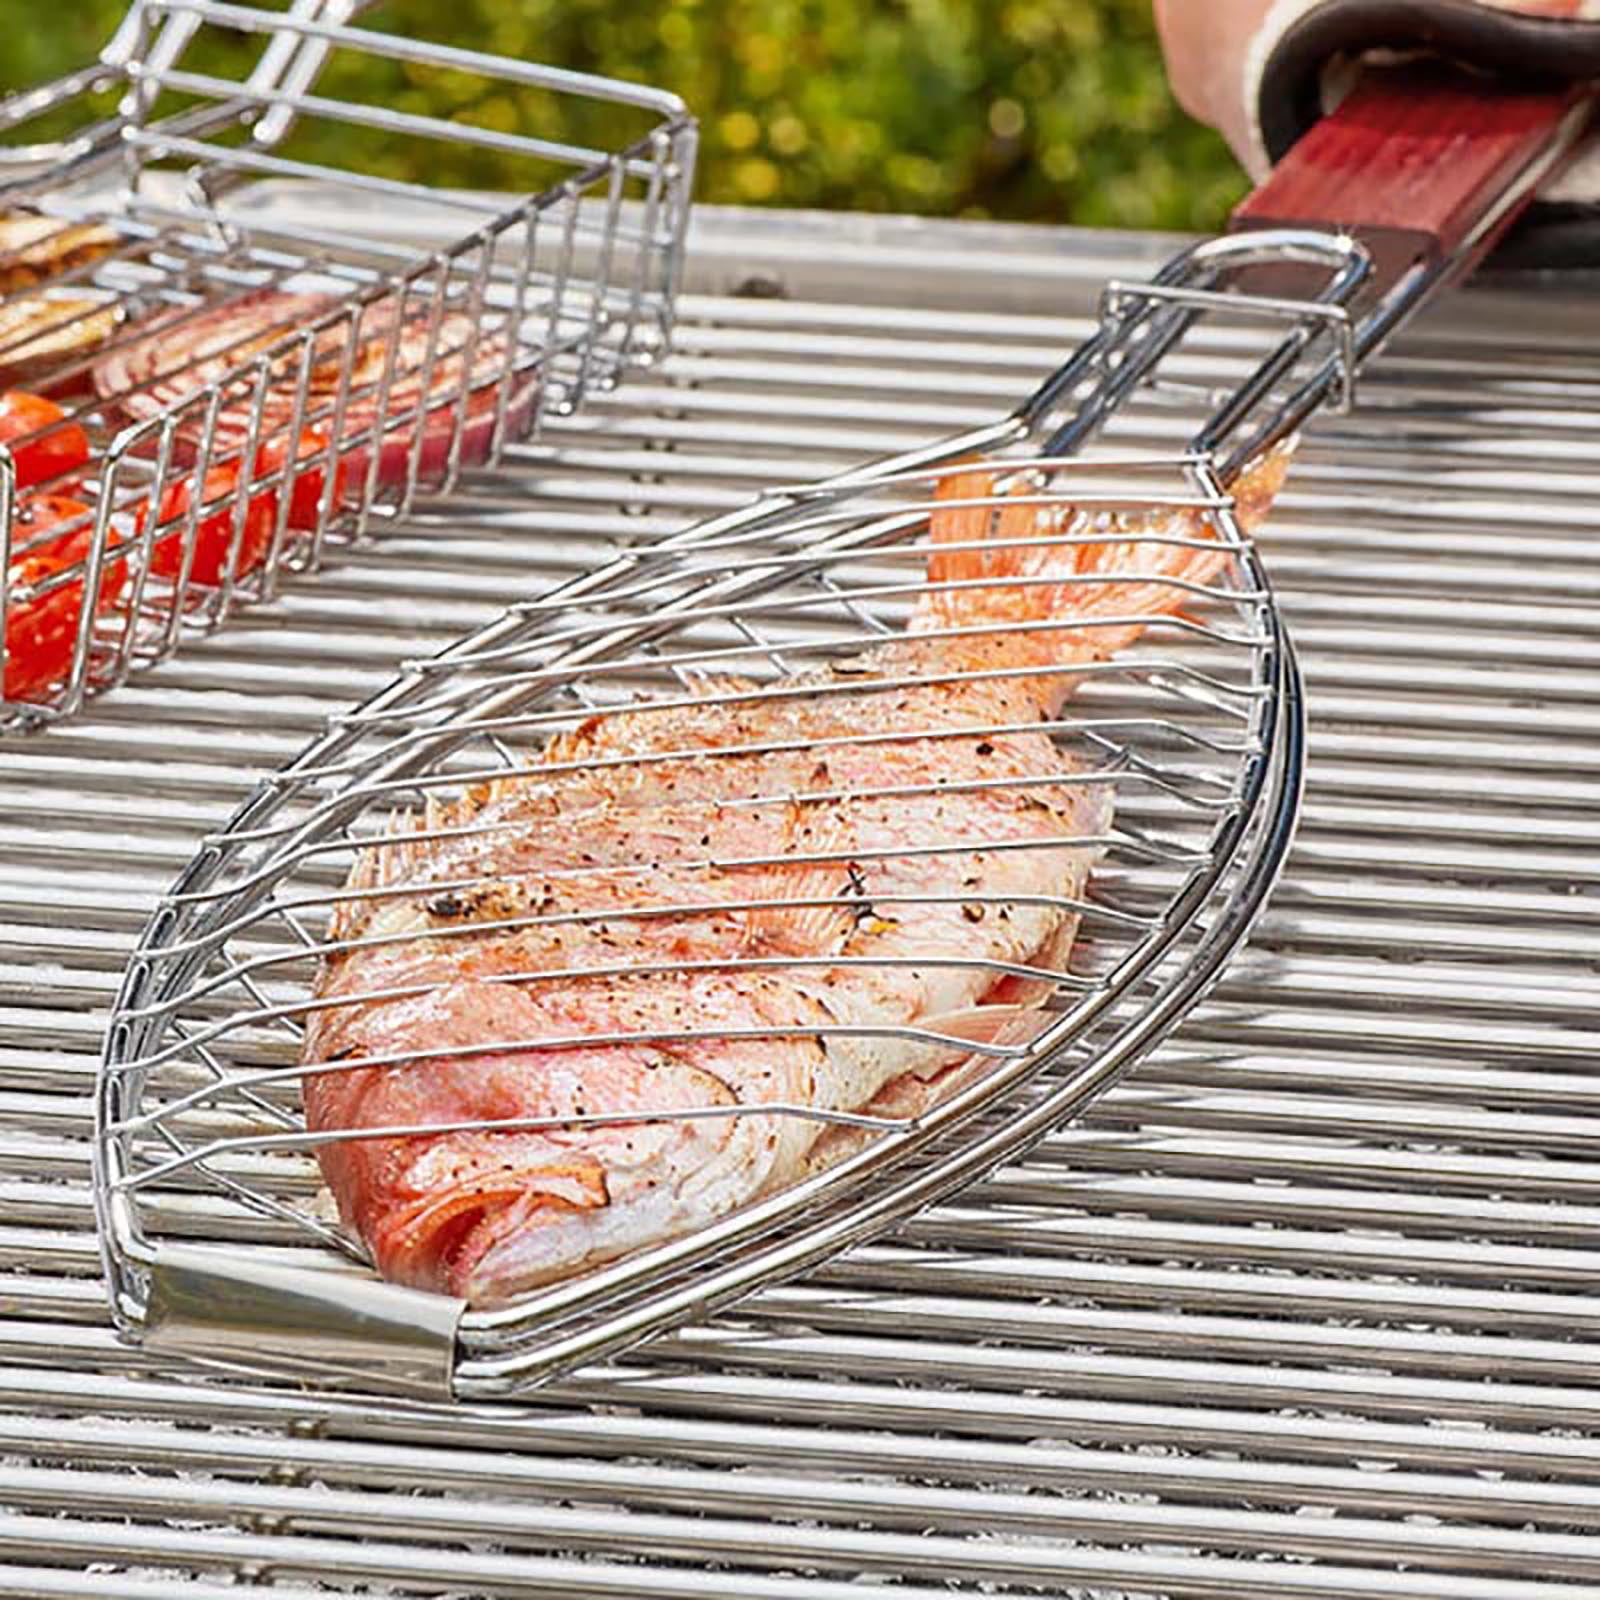 Cheers.us Portable Fish Grill Basket, BBQ Grilling Basket for Outdoor Grill, Rustproof Iron Grill Accessories, Heavy Duty Shrimp Grill Baskets, BBQ